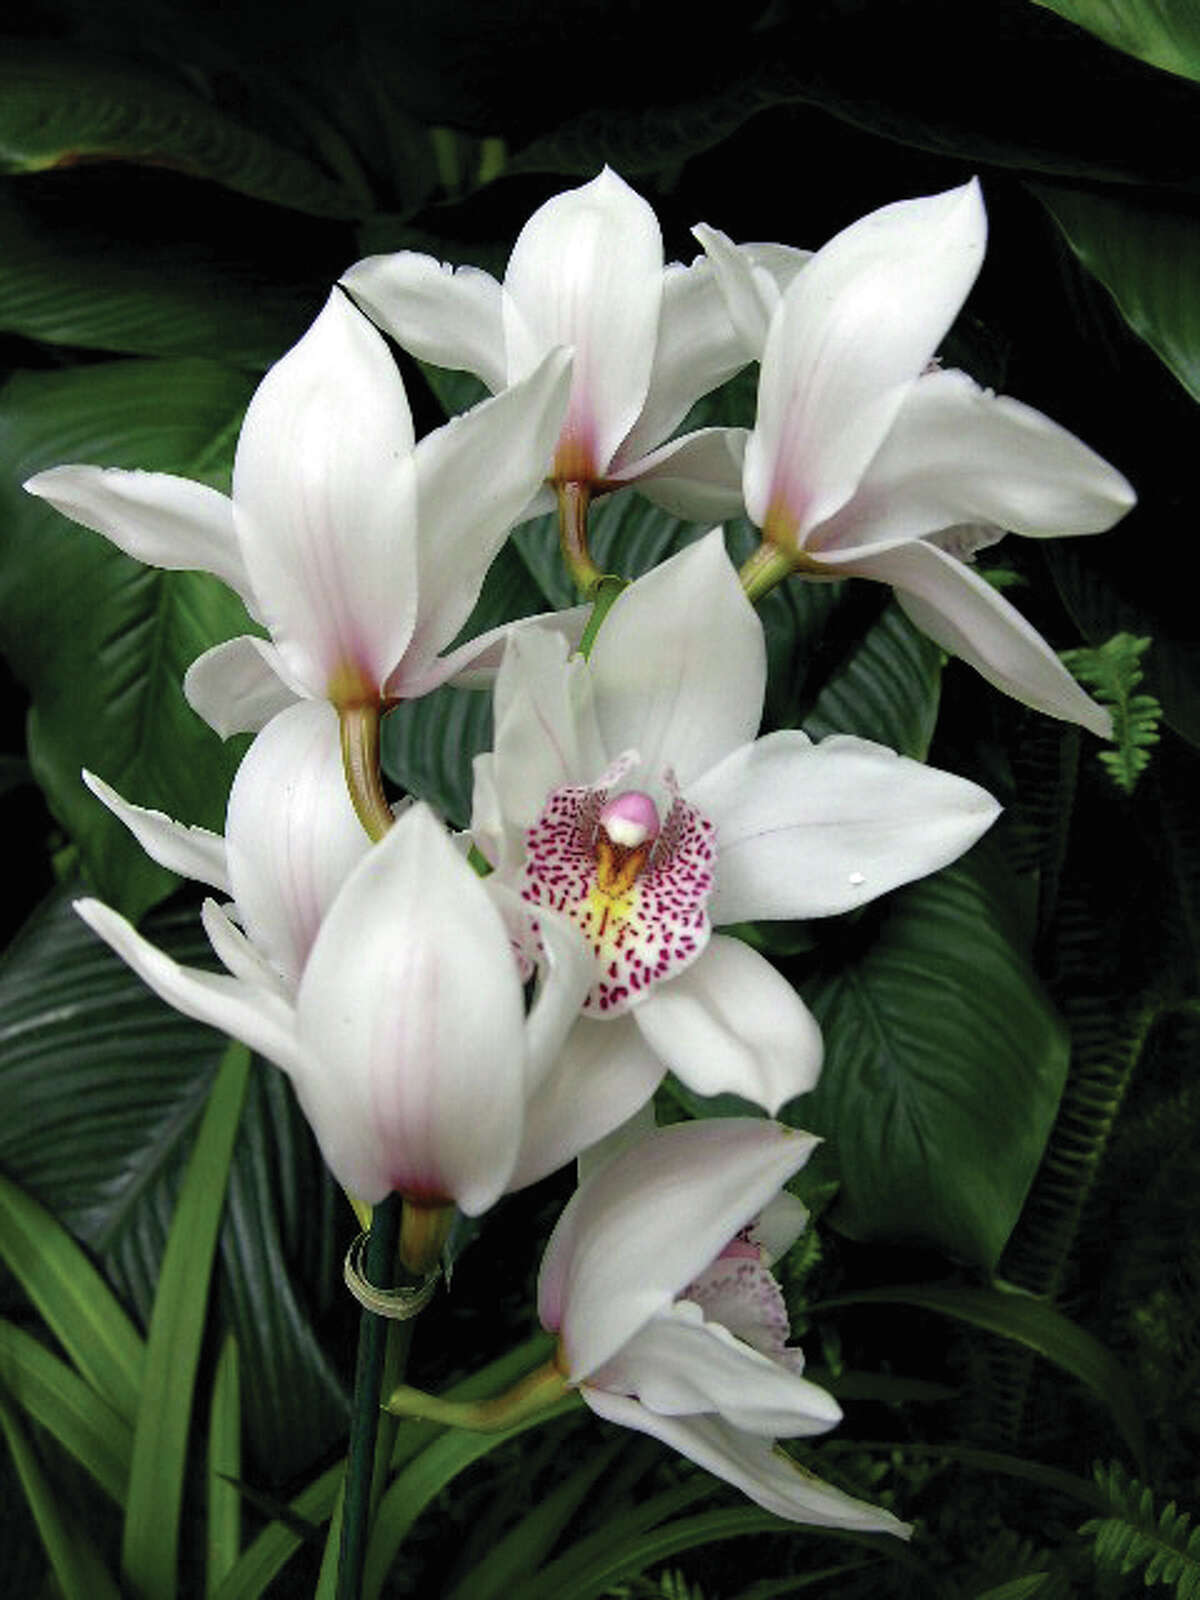 Cymbidium Valley Glory “Pink Halo” orchid featured in the Missouri Botanical Garden’s Orchid Show that runs through Sunday, March 27. This year’s Orchid Show offers visitors the chance to learn more about the habitats of orchids and how they adapt to changing environments.